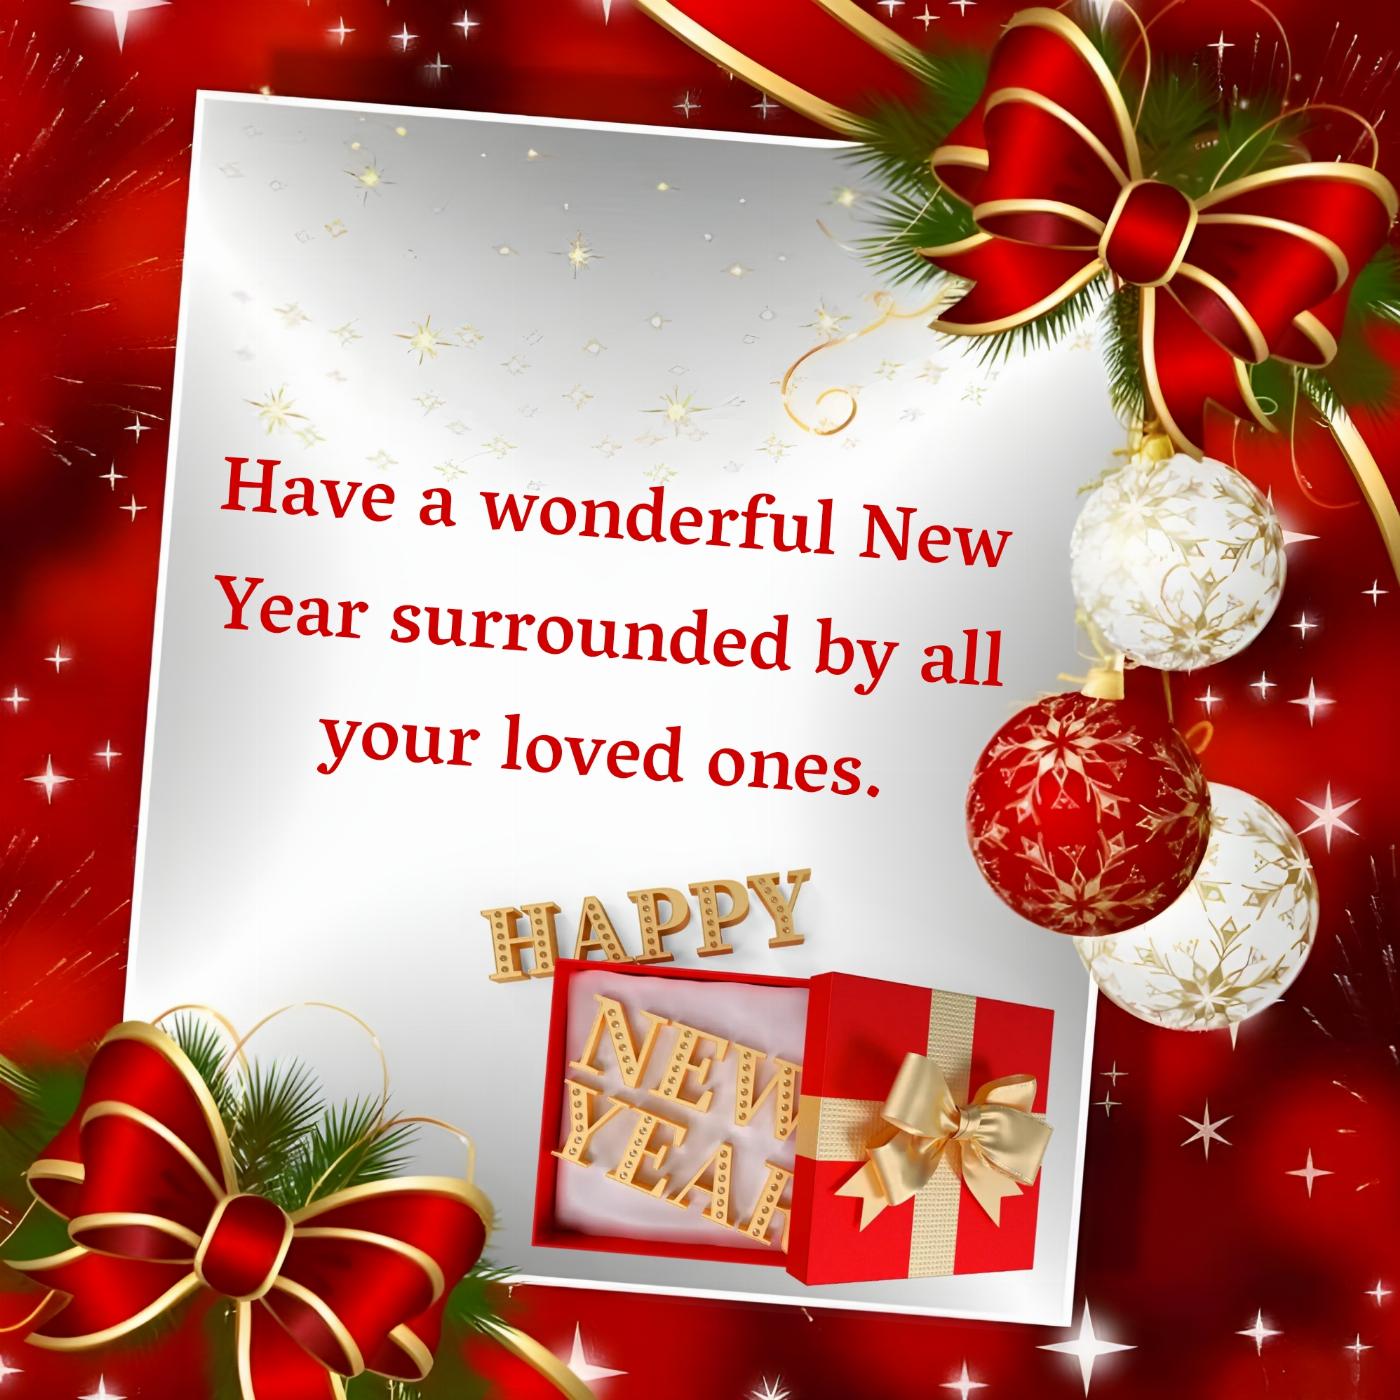 Have a wonderful New Year surrounded by all your loved ones